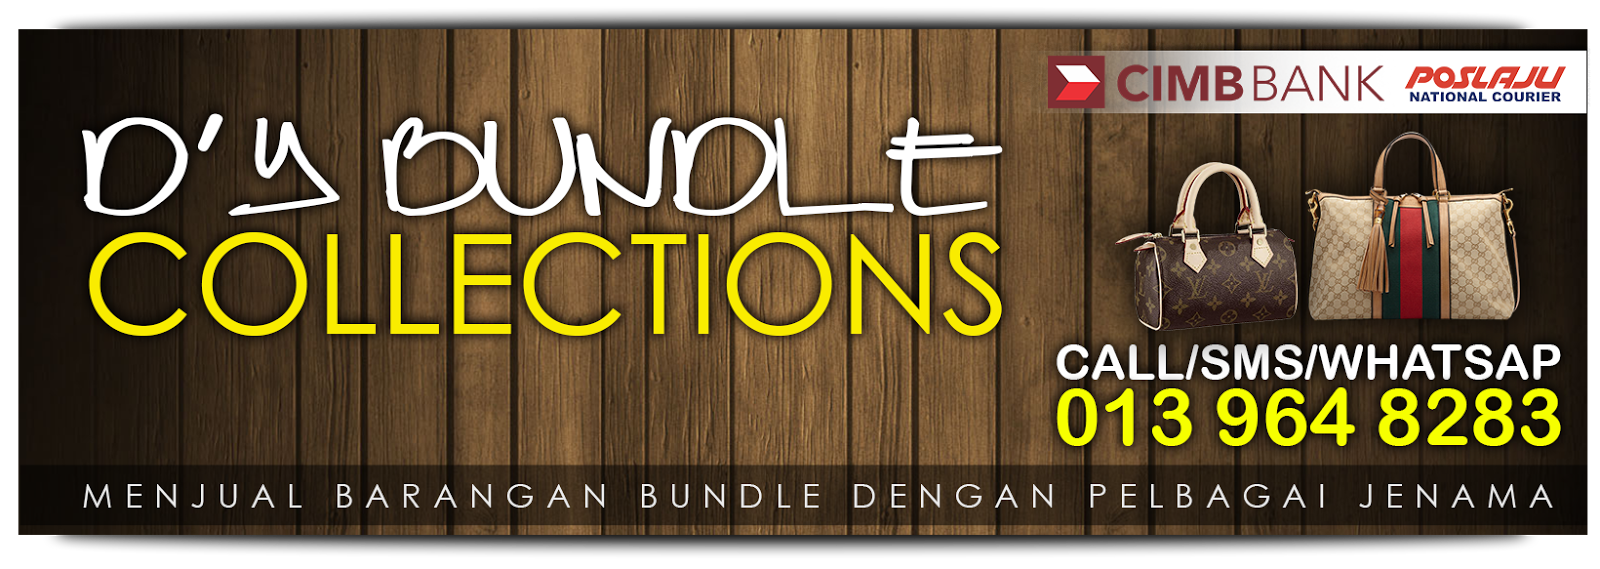 DYBUNDLE COLLECTION